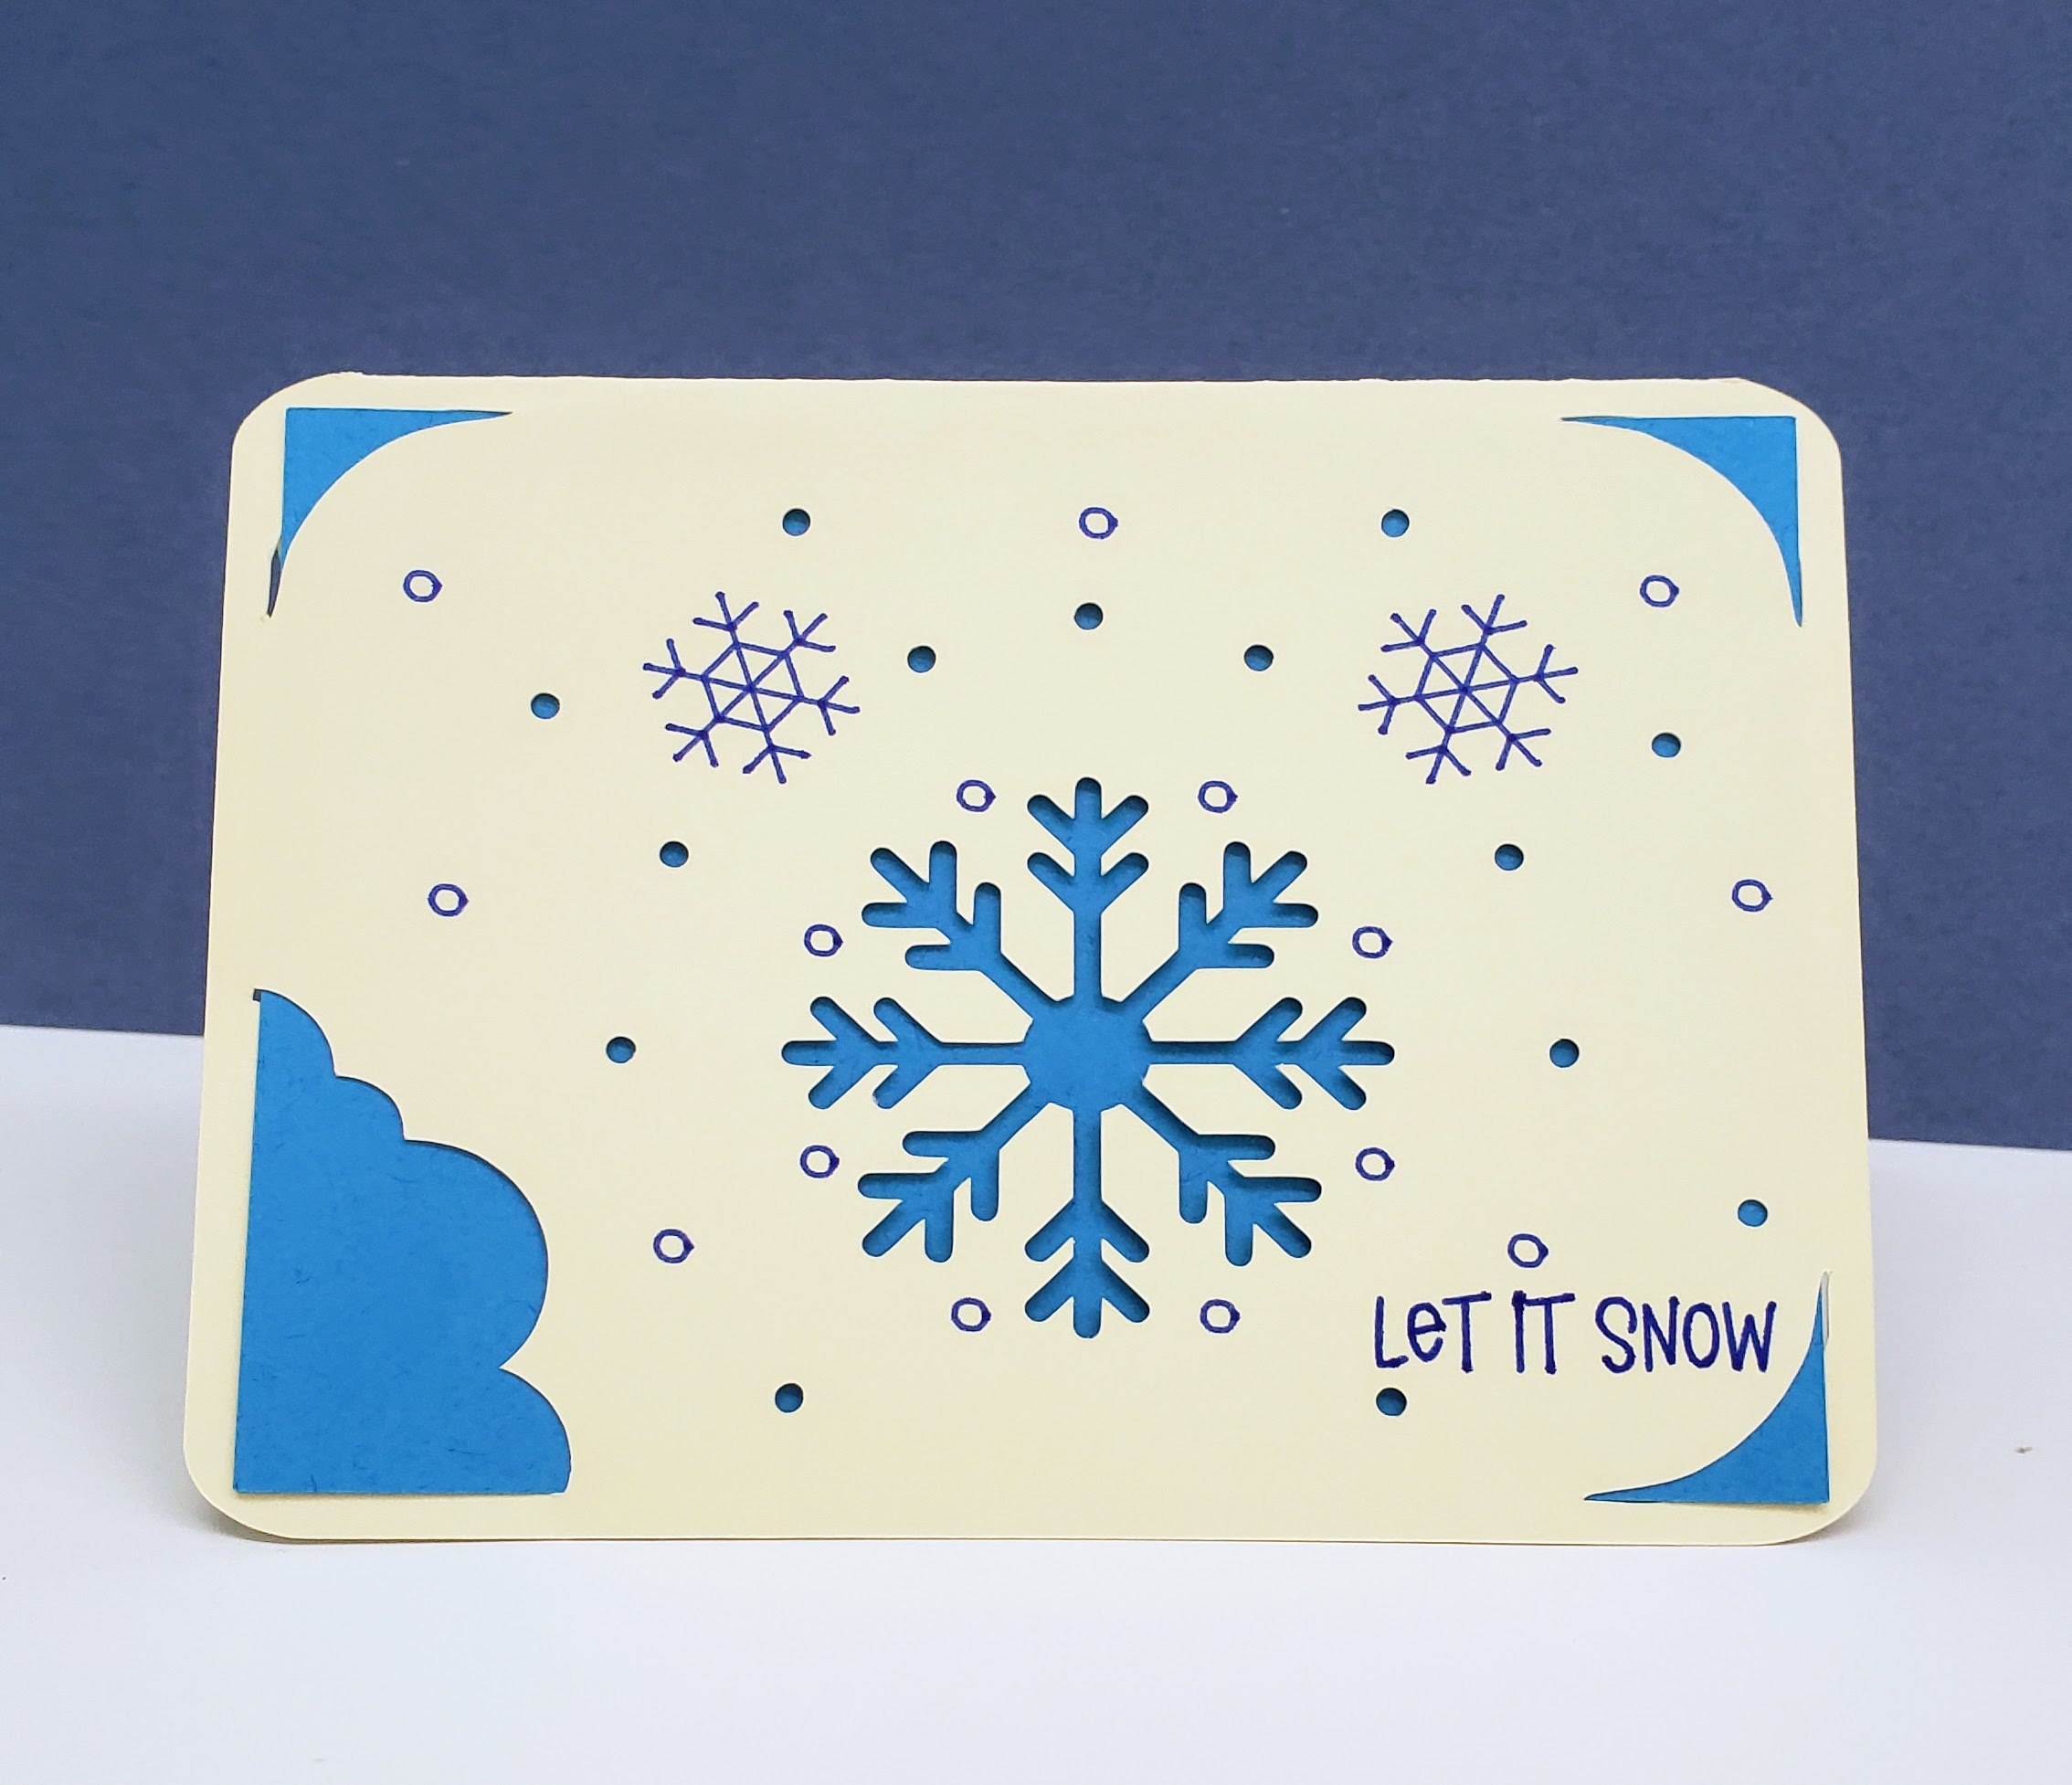 Tan and blue card with snowflakes says "Let it snow"